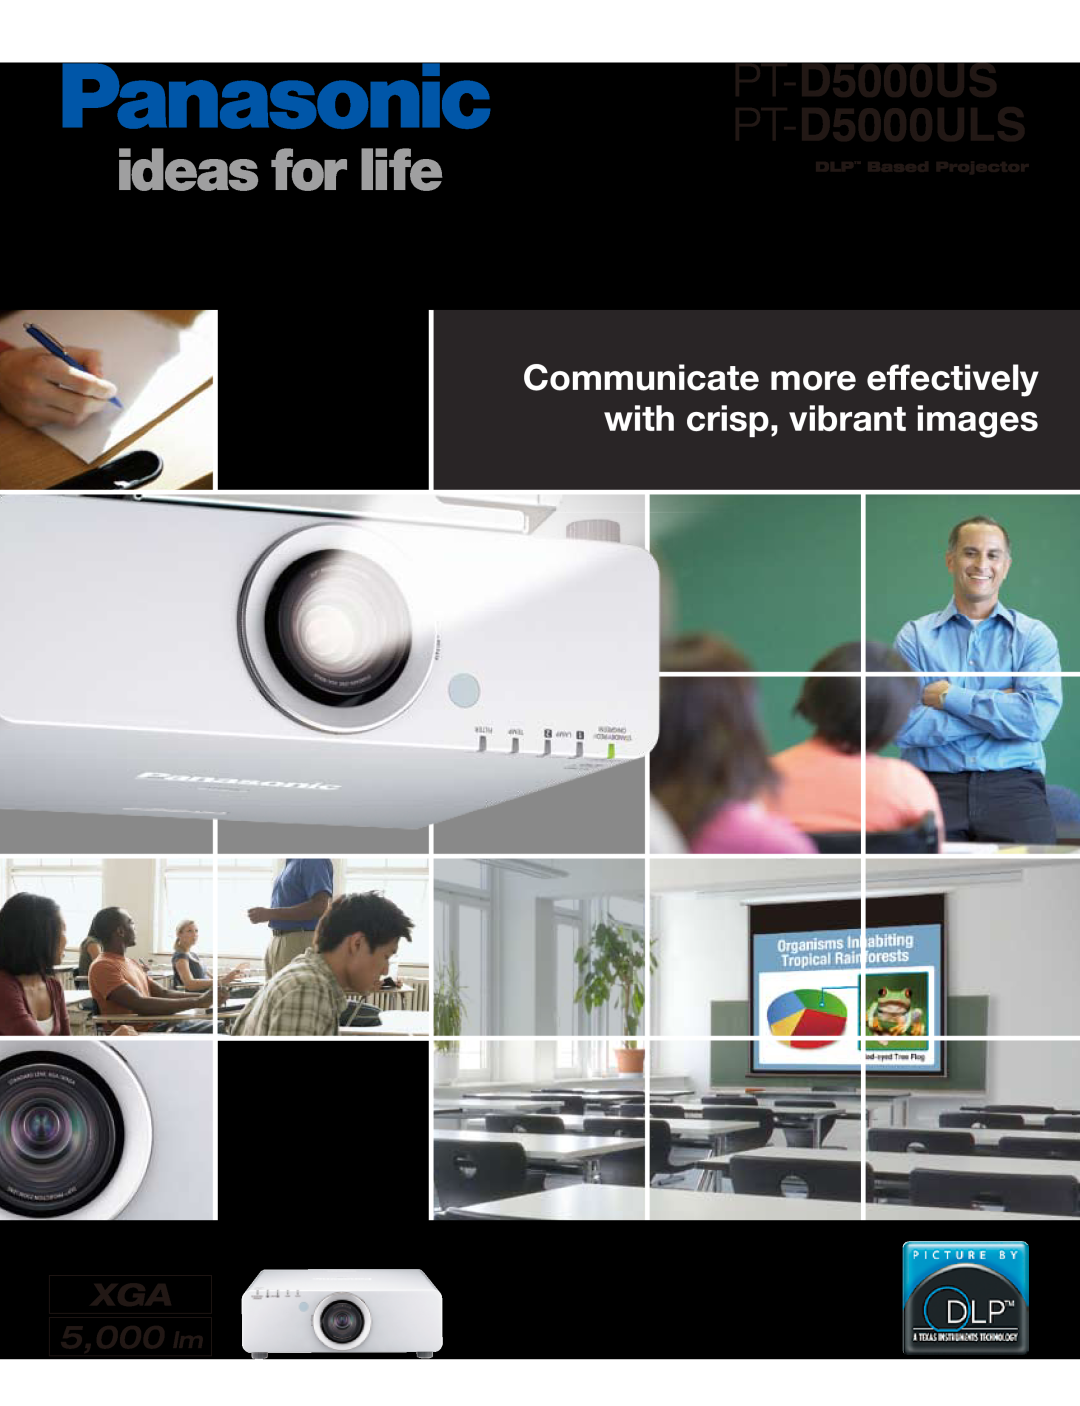 Panasonic specifications PT-D5000US PT-D5000ULS, Communicate more effectively with crisp, vibrant images, 5,000 lm 